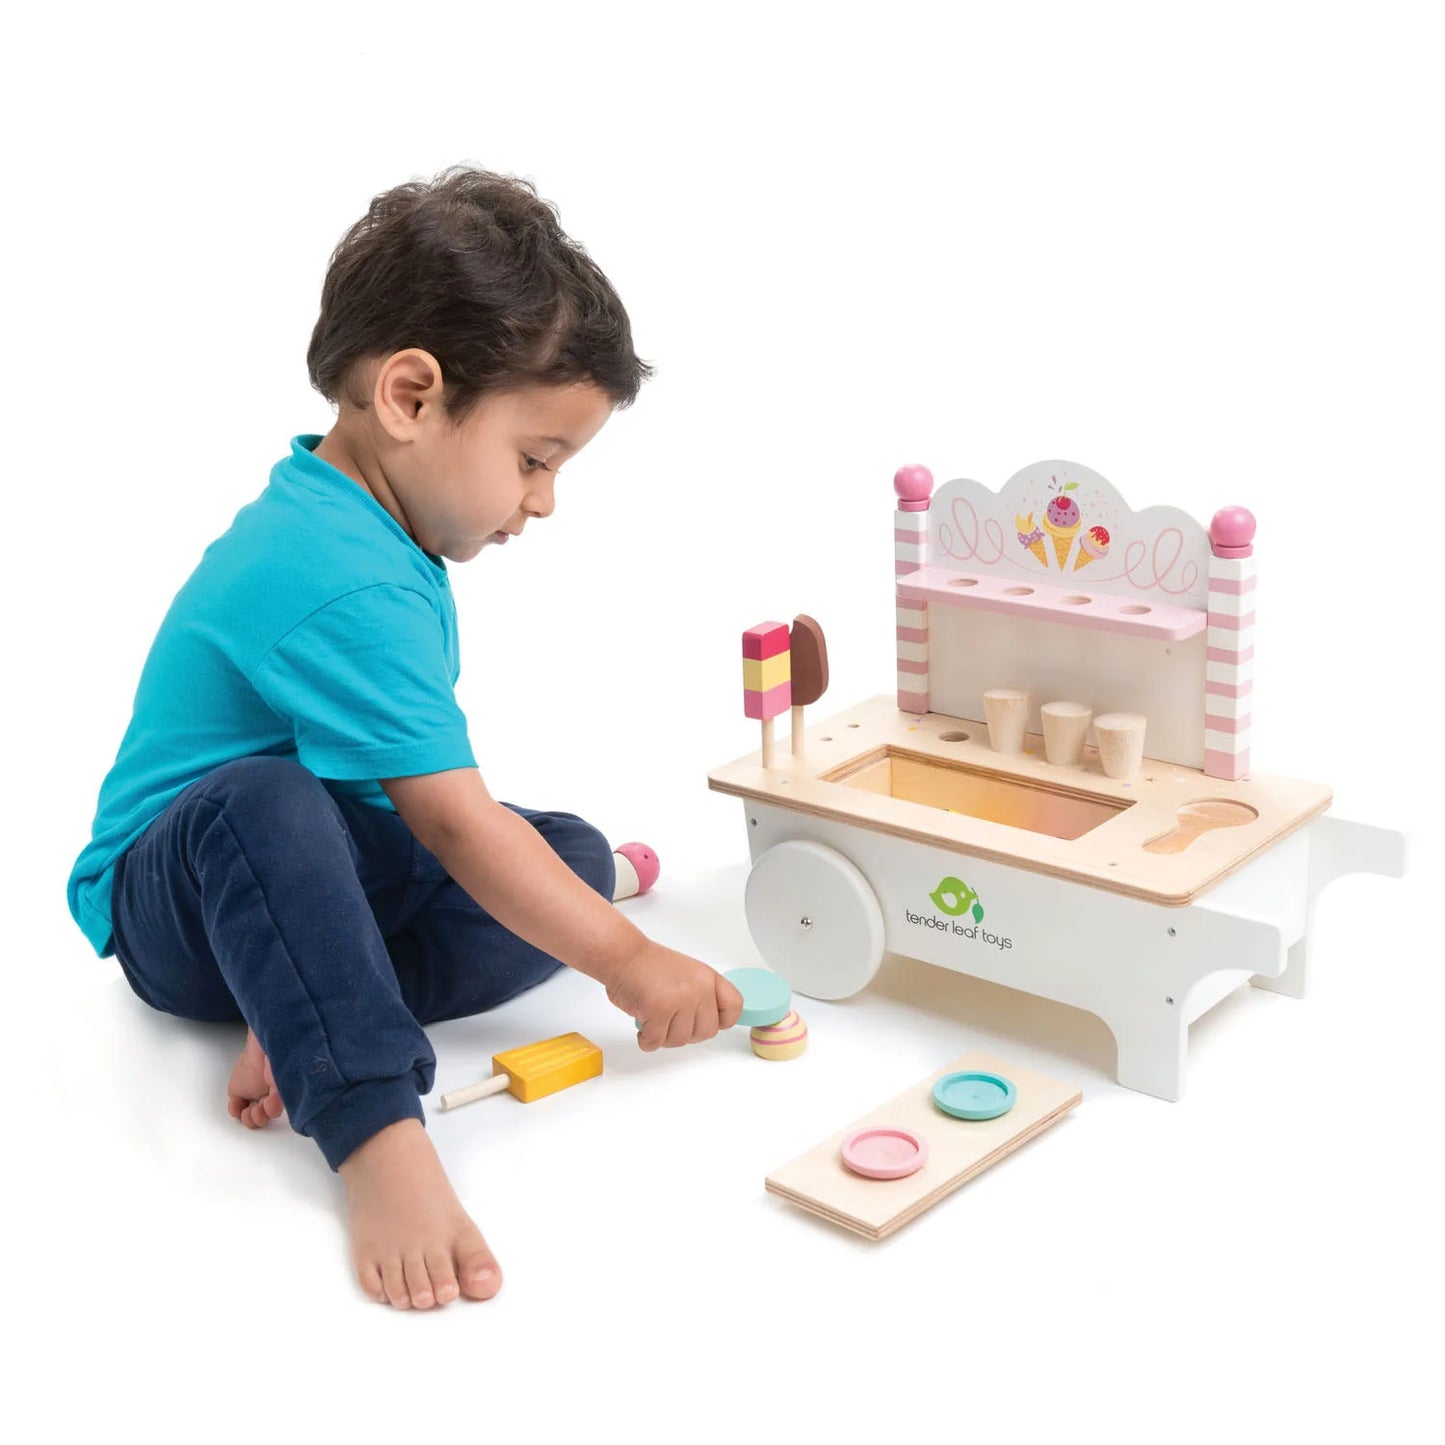 Tender Leaf Toys Ice Cream Cart Play Set - Little Reef and Friends